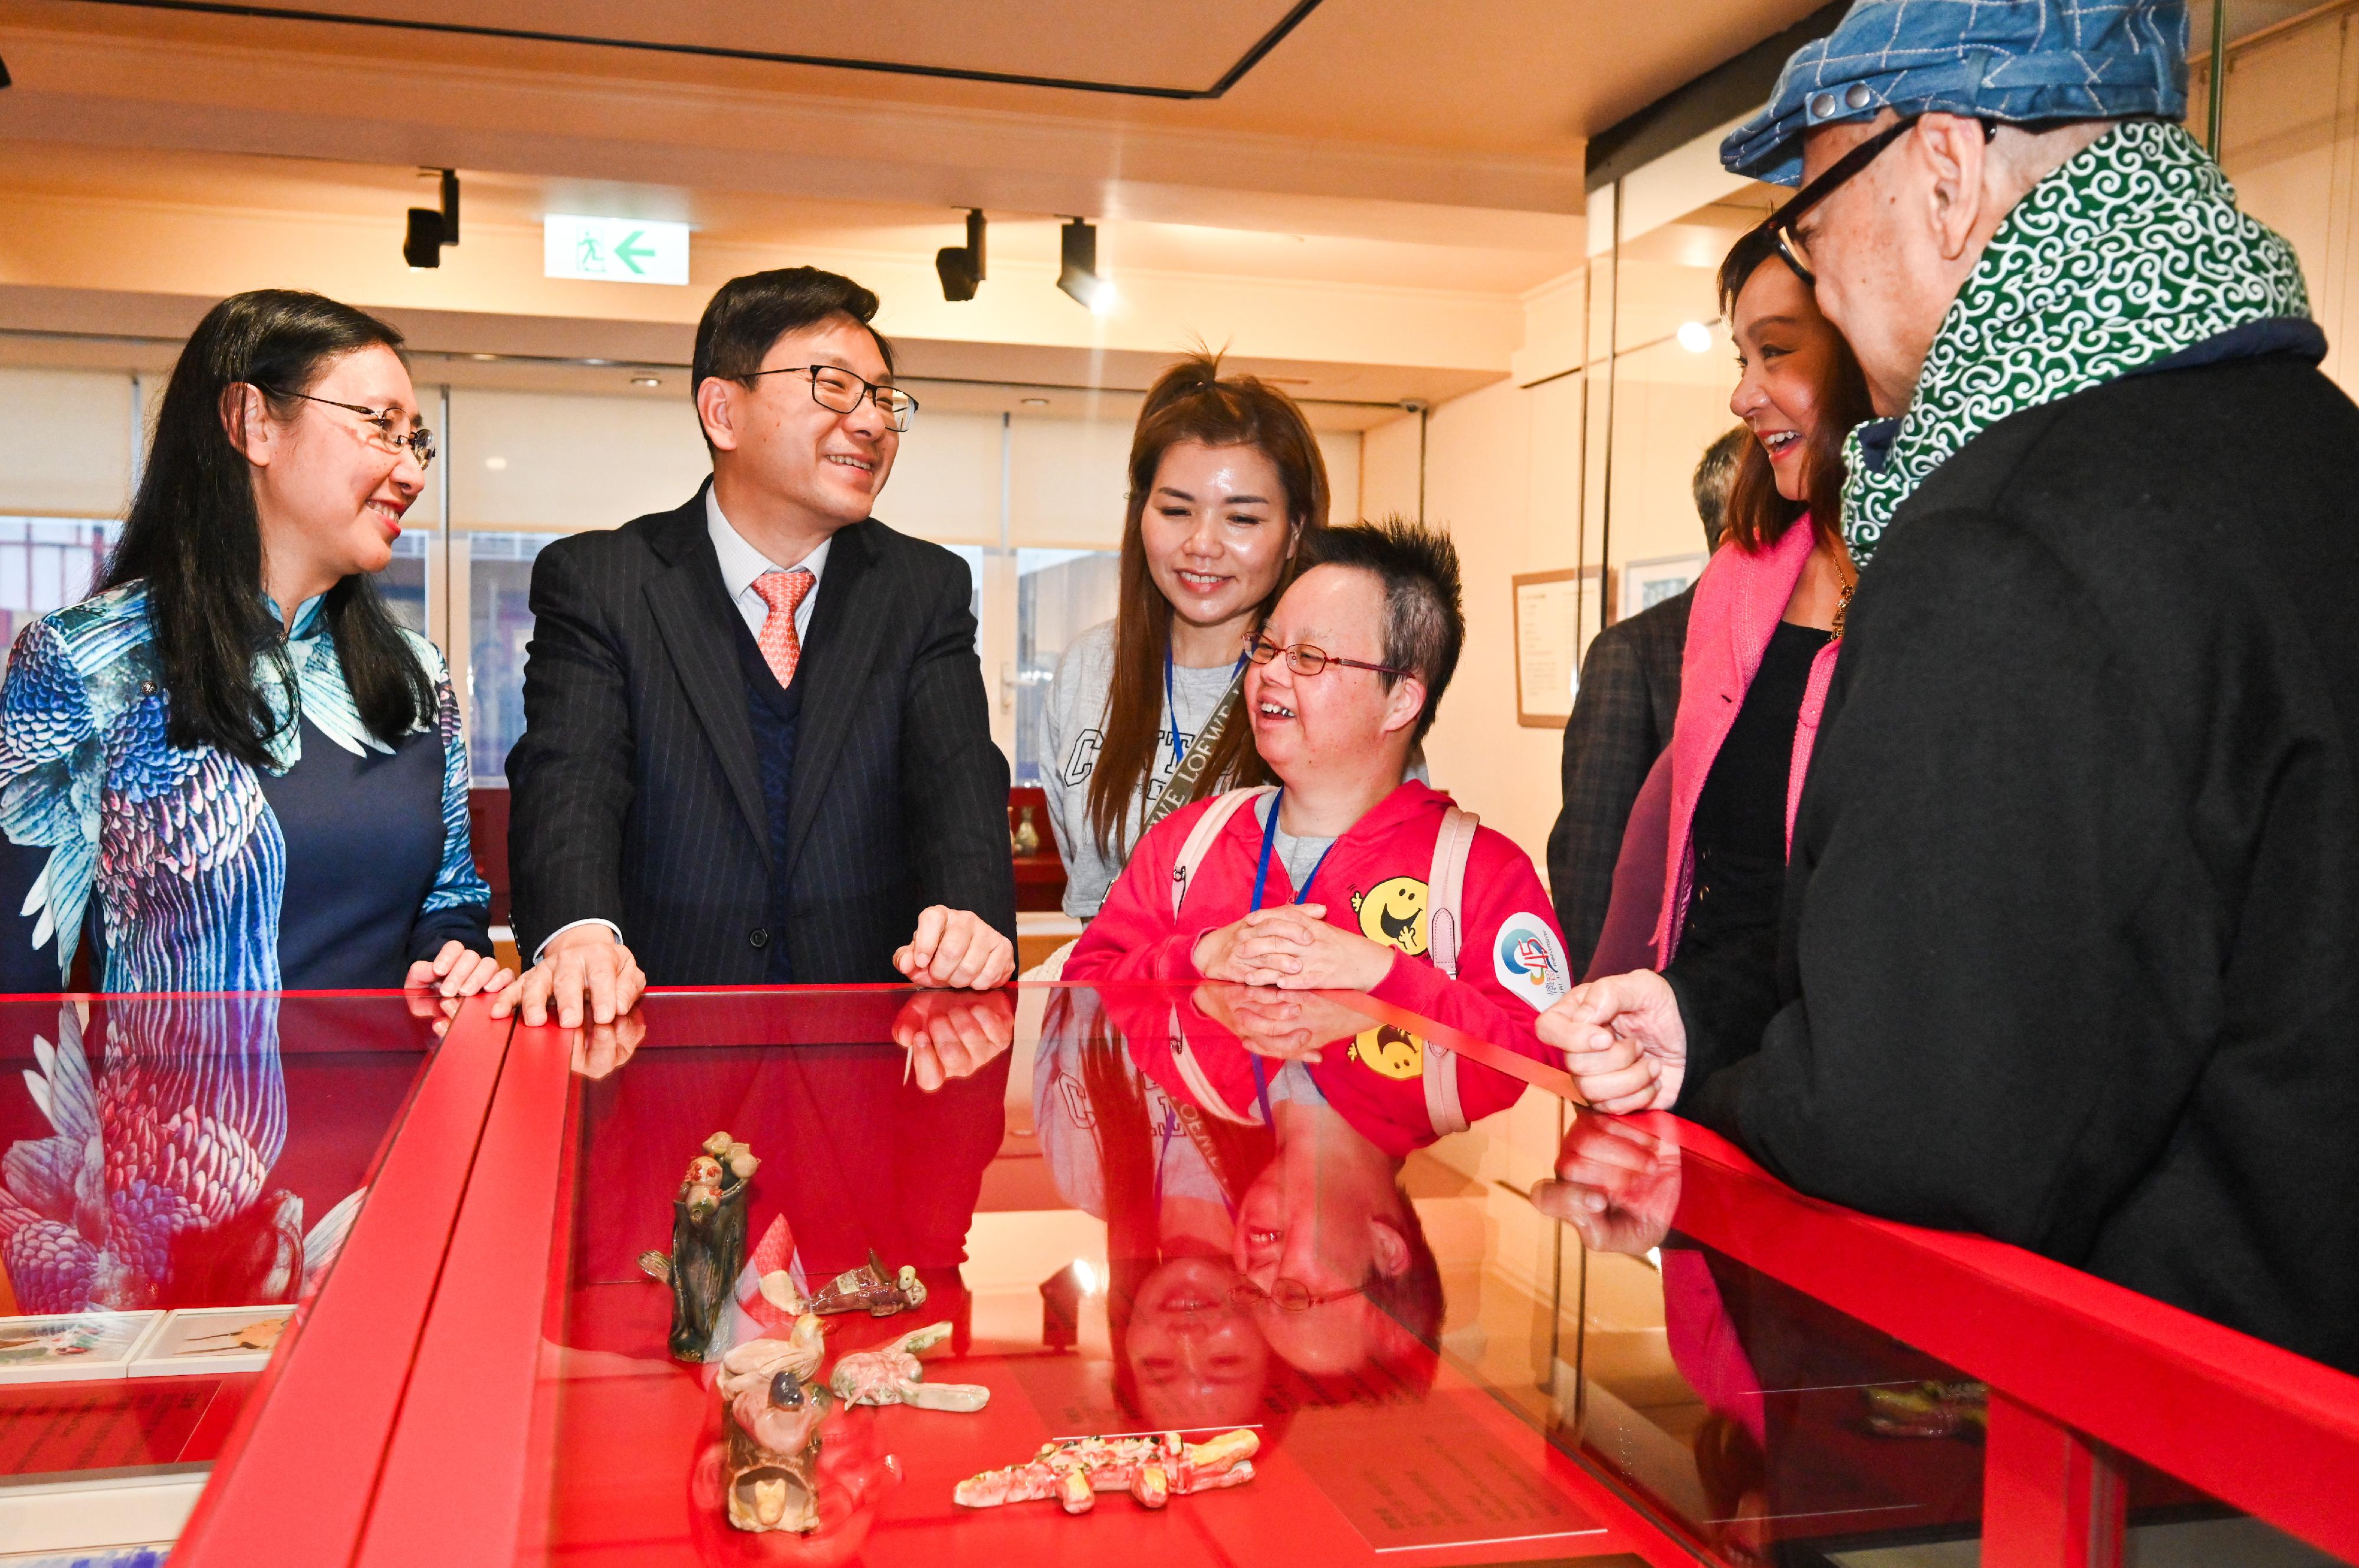 The Opening Ceremony of the "Infinite Creativity in Art" Exhibition, jointly organised by the Labour and Welfare Bureau, the Social Welfare Department, the Arts Development Fund for Persons with Disabilities  and Sun Museum, was held today (January 11). Photo shows the Secretary for Labour and Welfare, Mr Chris Sun (second left), and the Permanent Secretary for Labour and Welfare, Ms Alice Lau (first left), touring the exhibition.